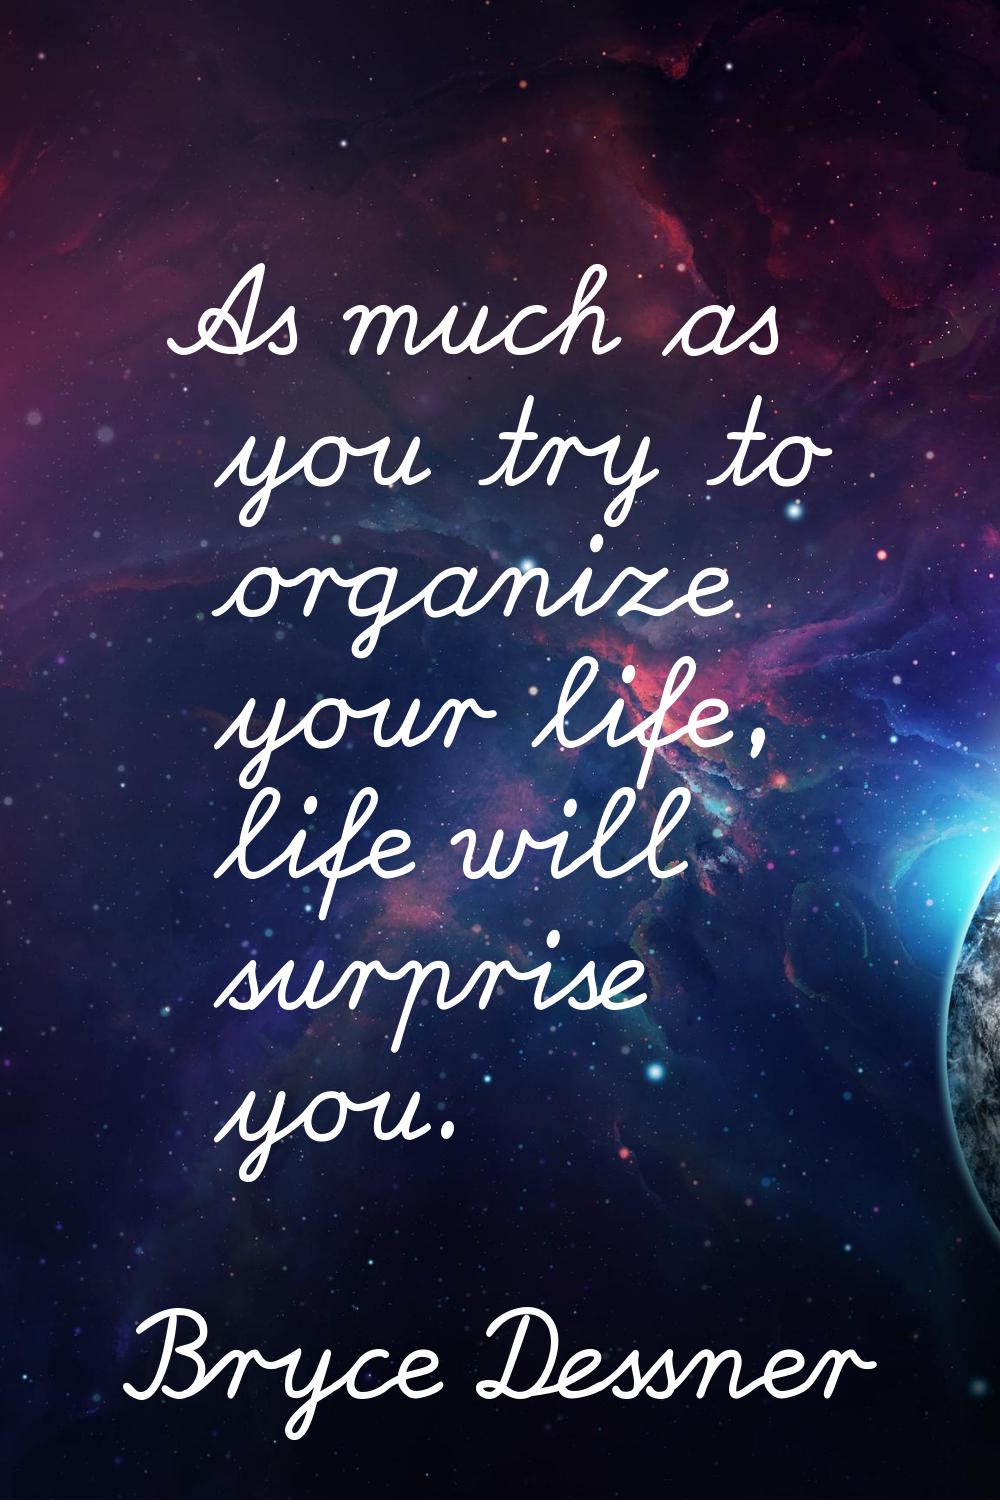 As much as you try to organize your life, life will surprise you.